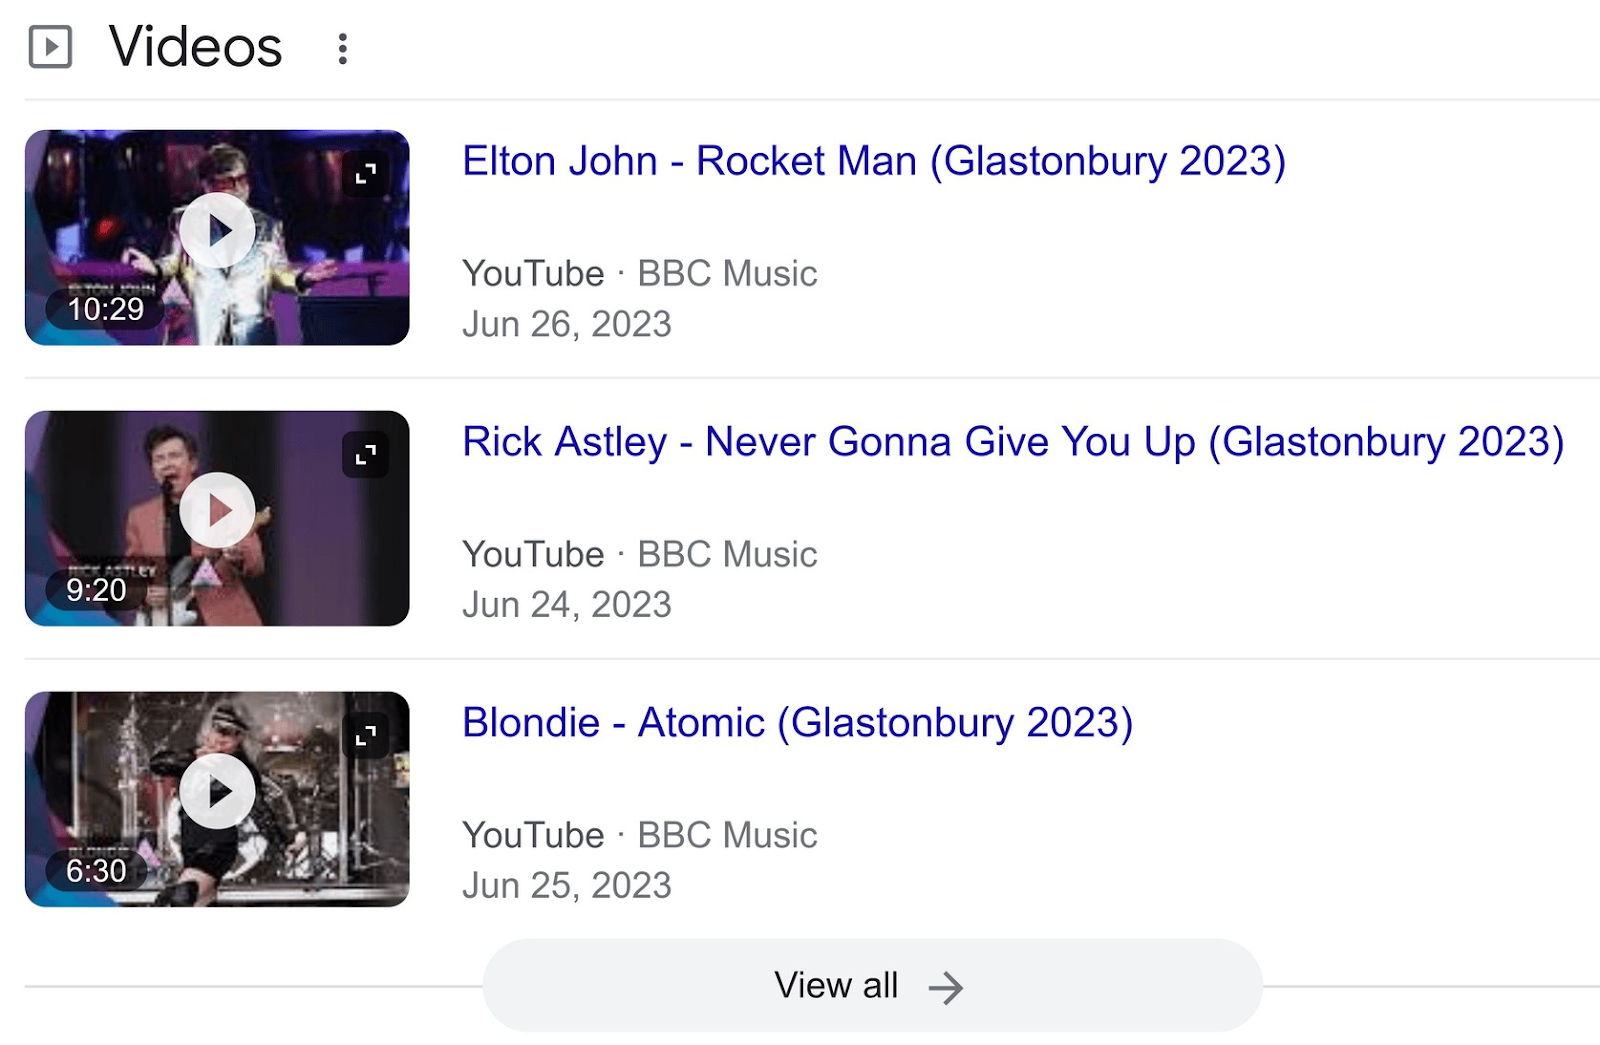 BBC YouTube content ranks well in "Videos" section on Google SERP